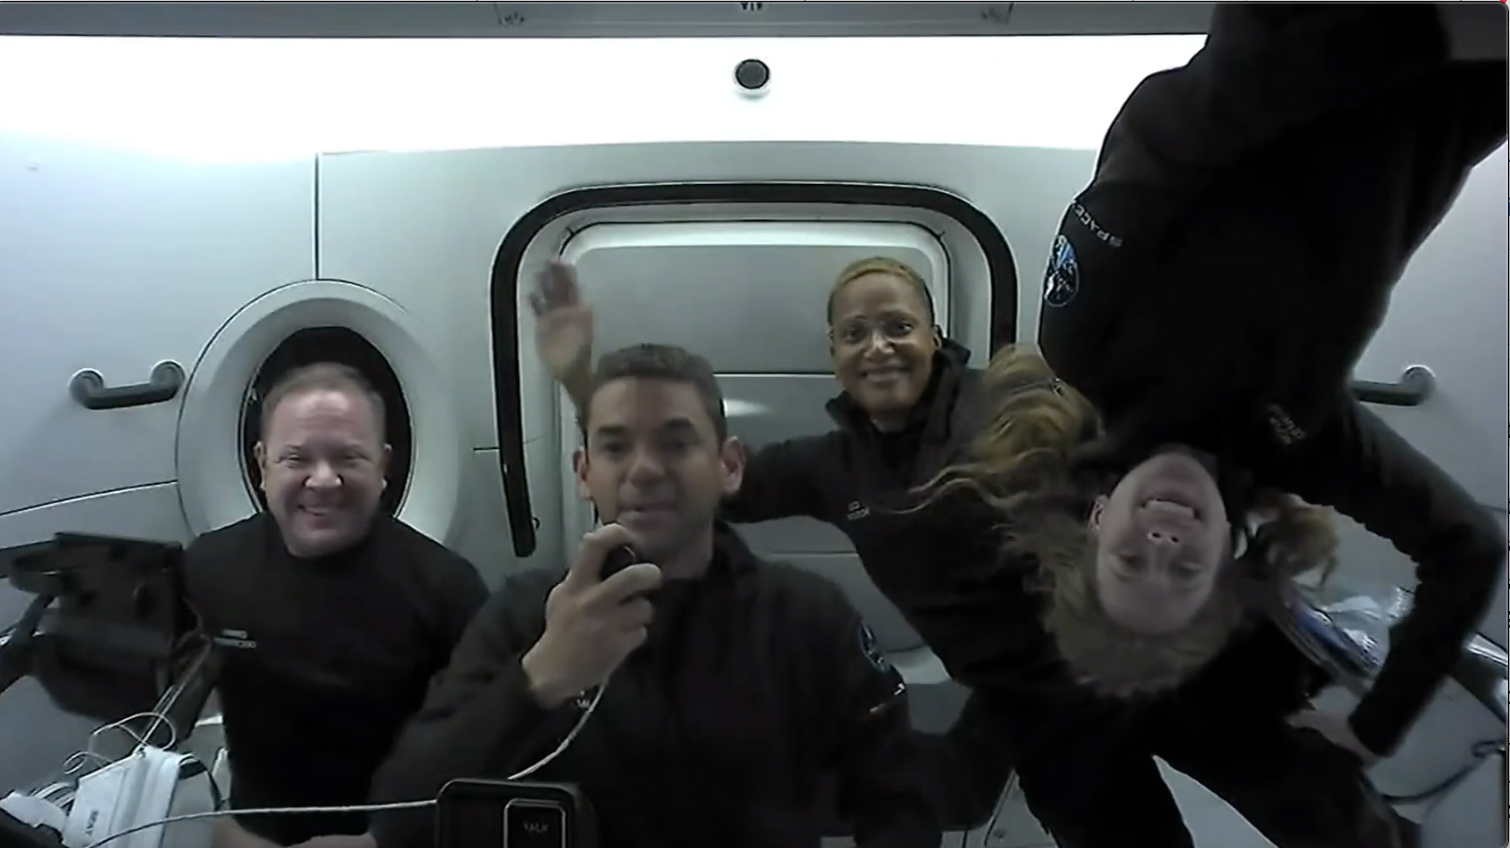 SpaceX’s Inspiration4 crew is having a blast and doing science in orbit (video)